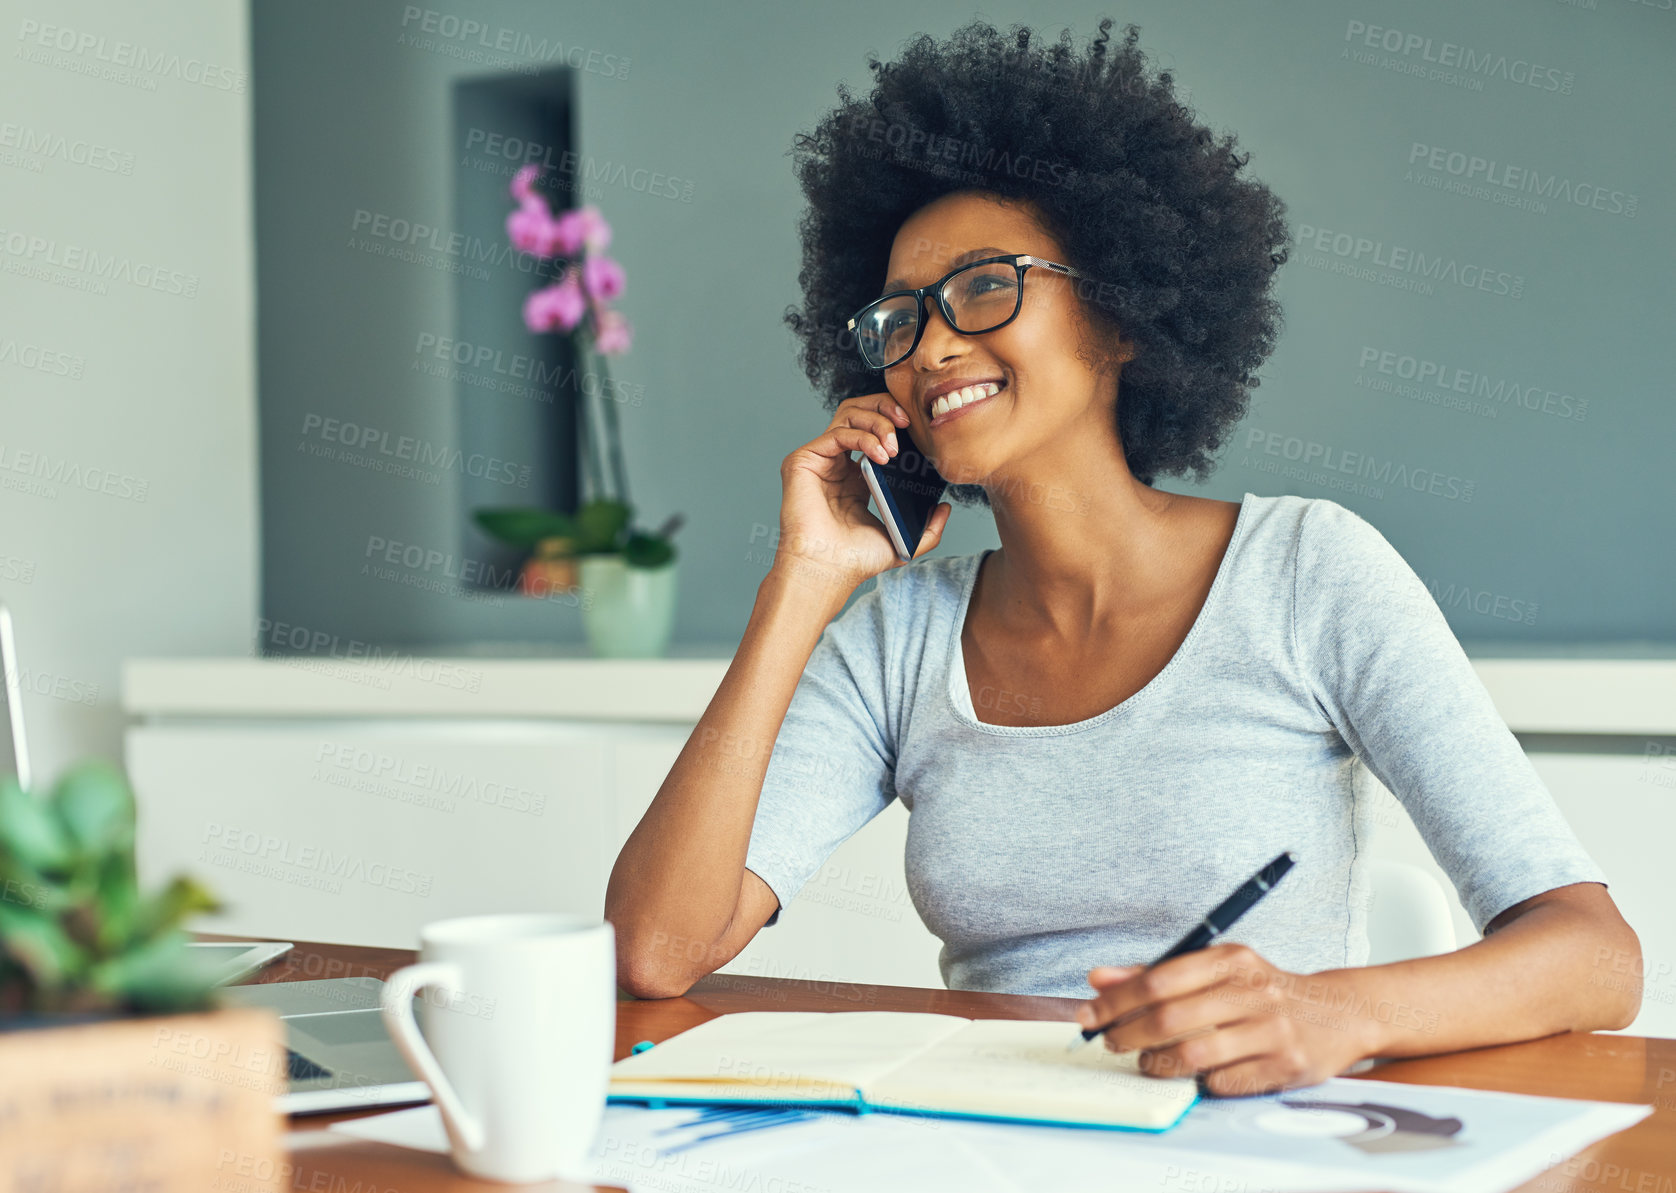 Buy stock photo Cropped shot of an attractive young businesswoman working at home